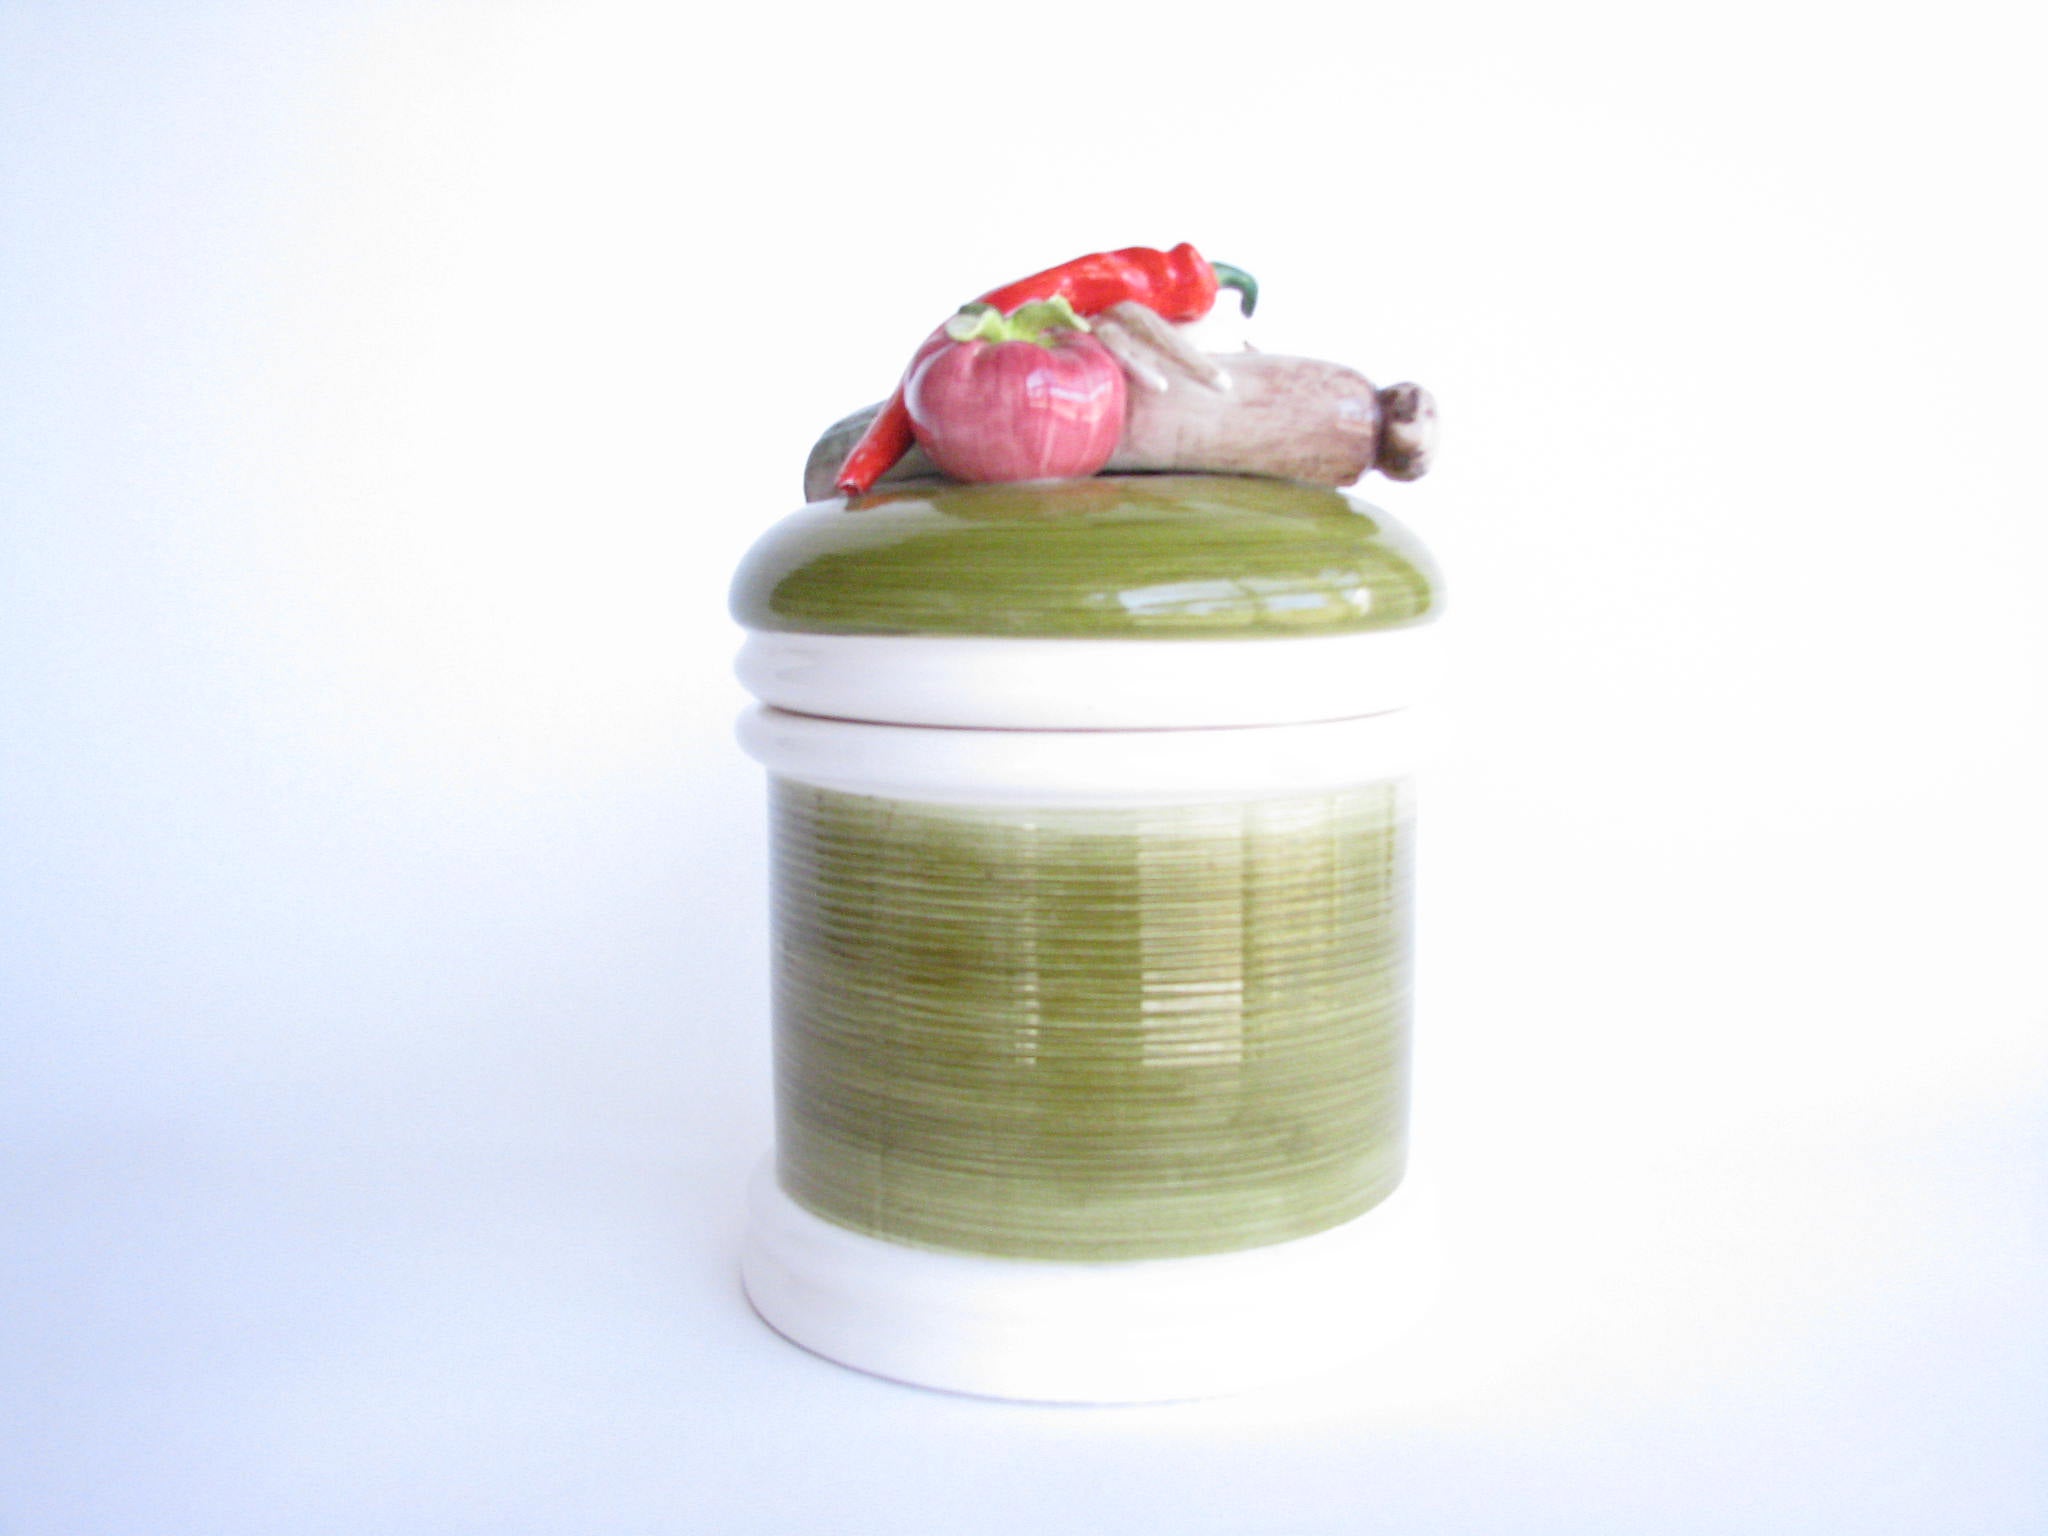 edgebrookhouse - Vintage Ceramic Lidded Canister Topped with Decorative Vegetables